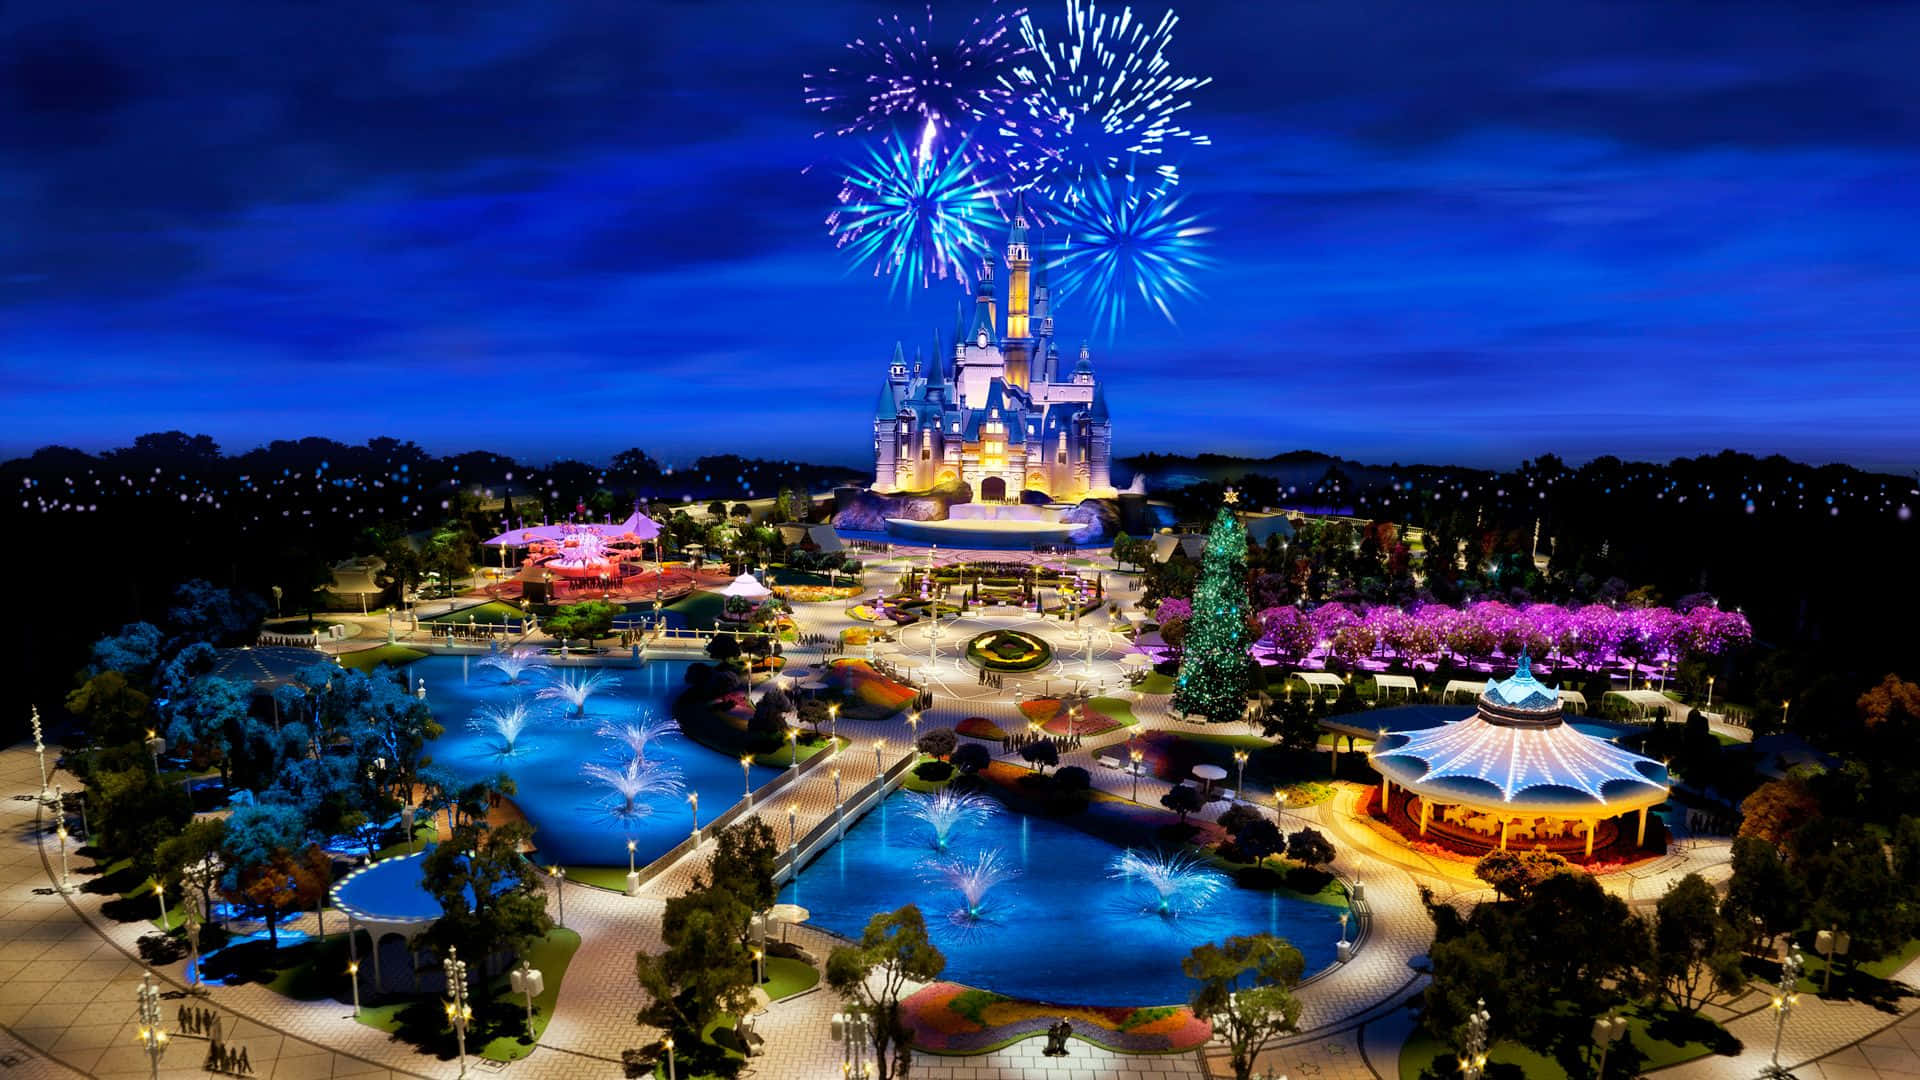 A Disney Park With Fireworks And A Castle